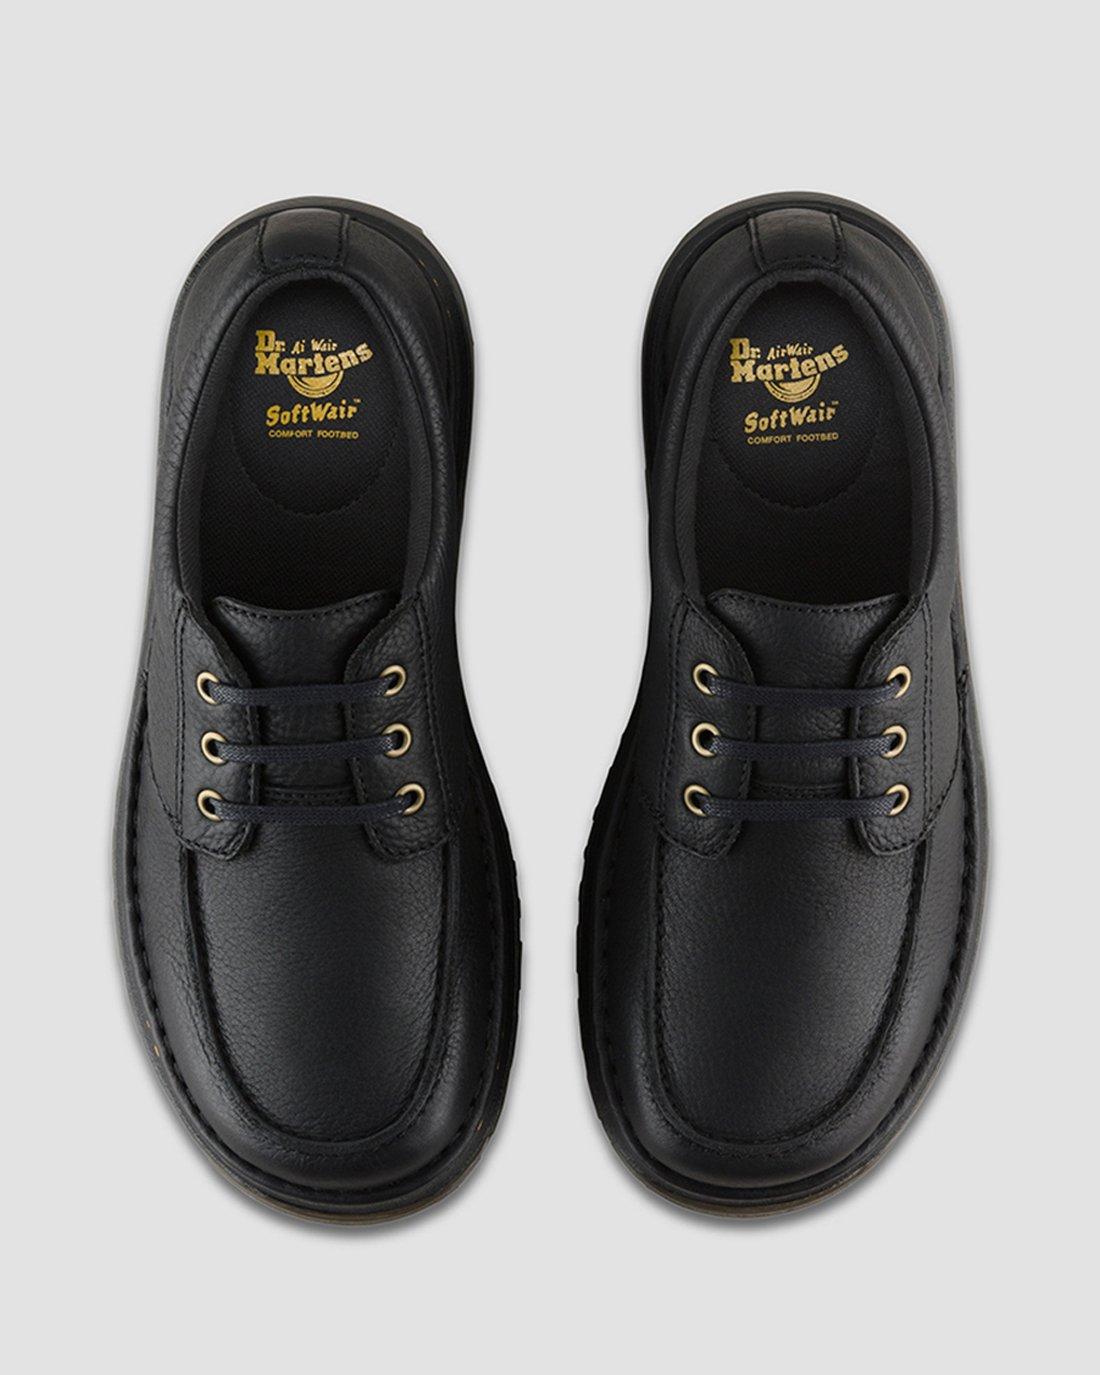 Lubbock Grizzly Dr. Martens